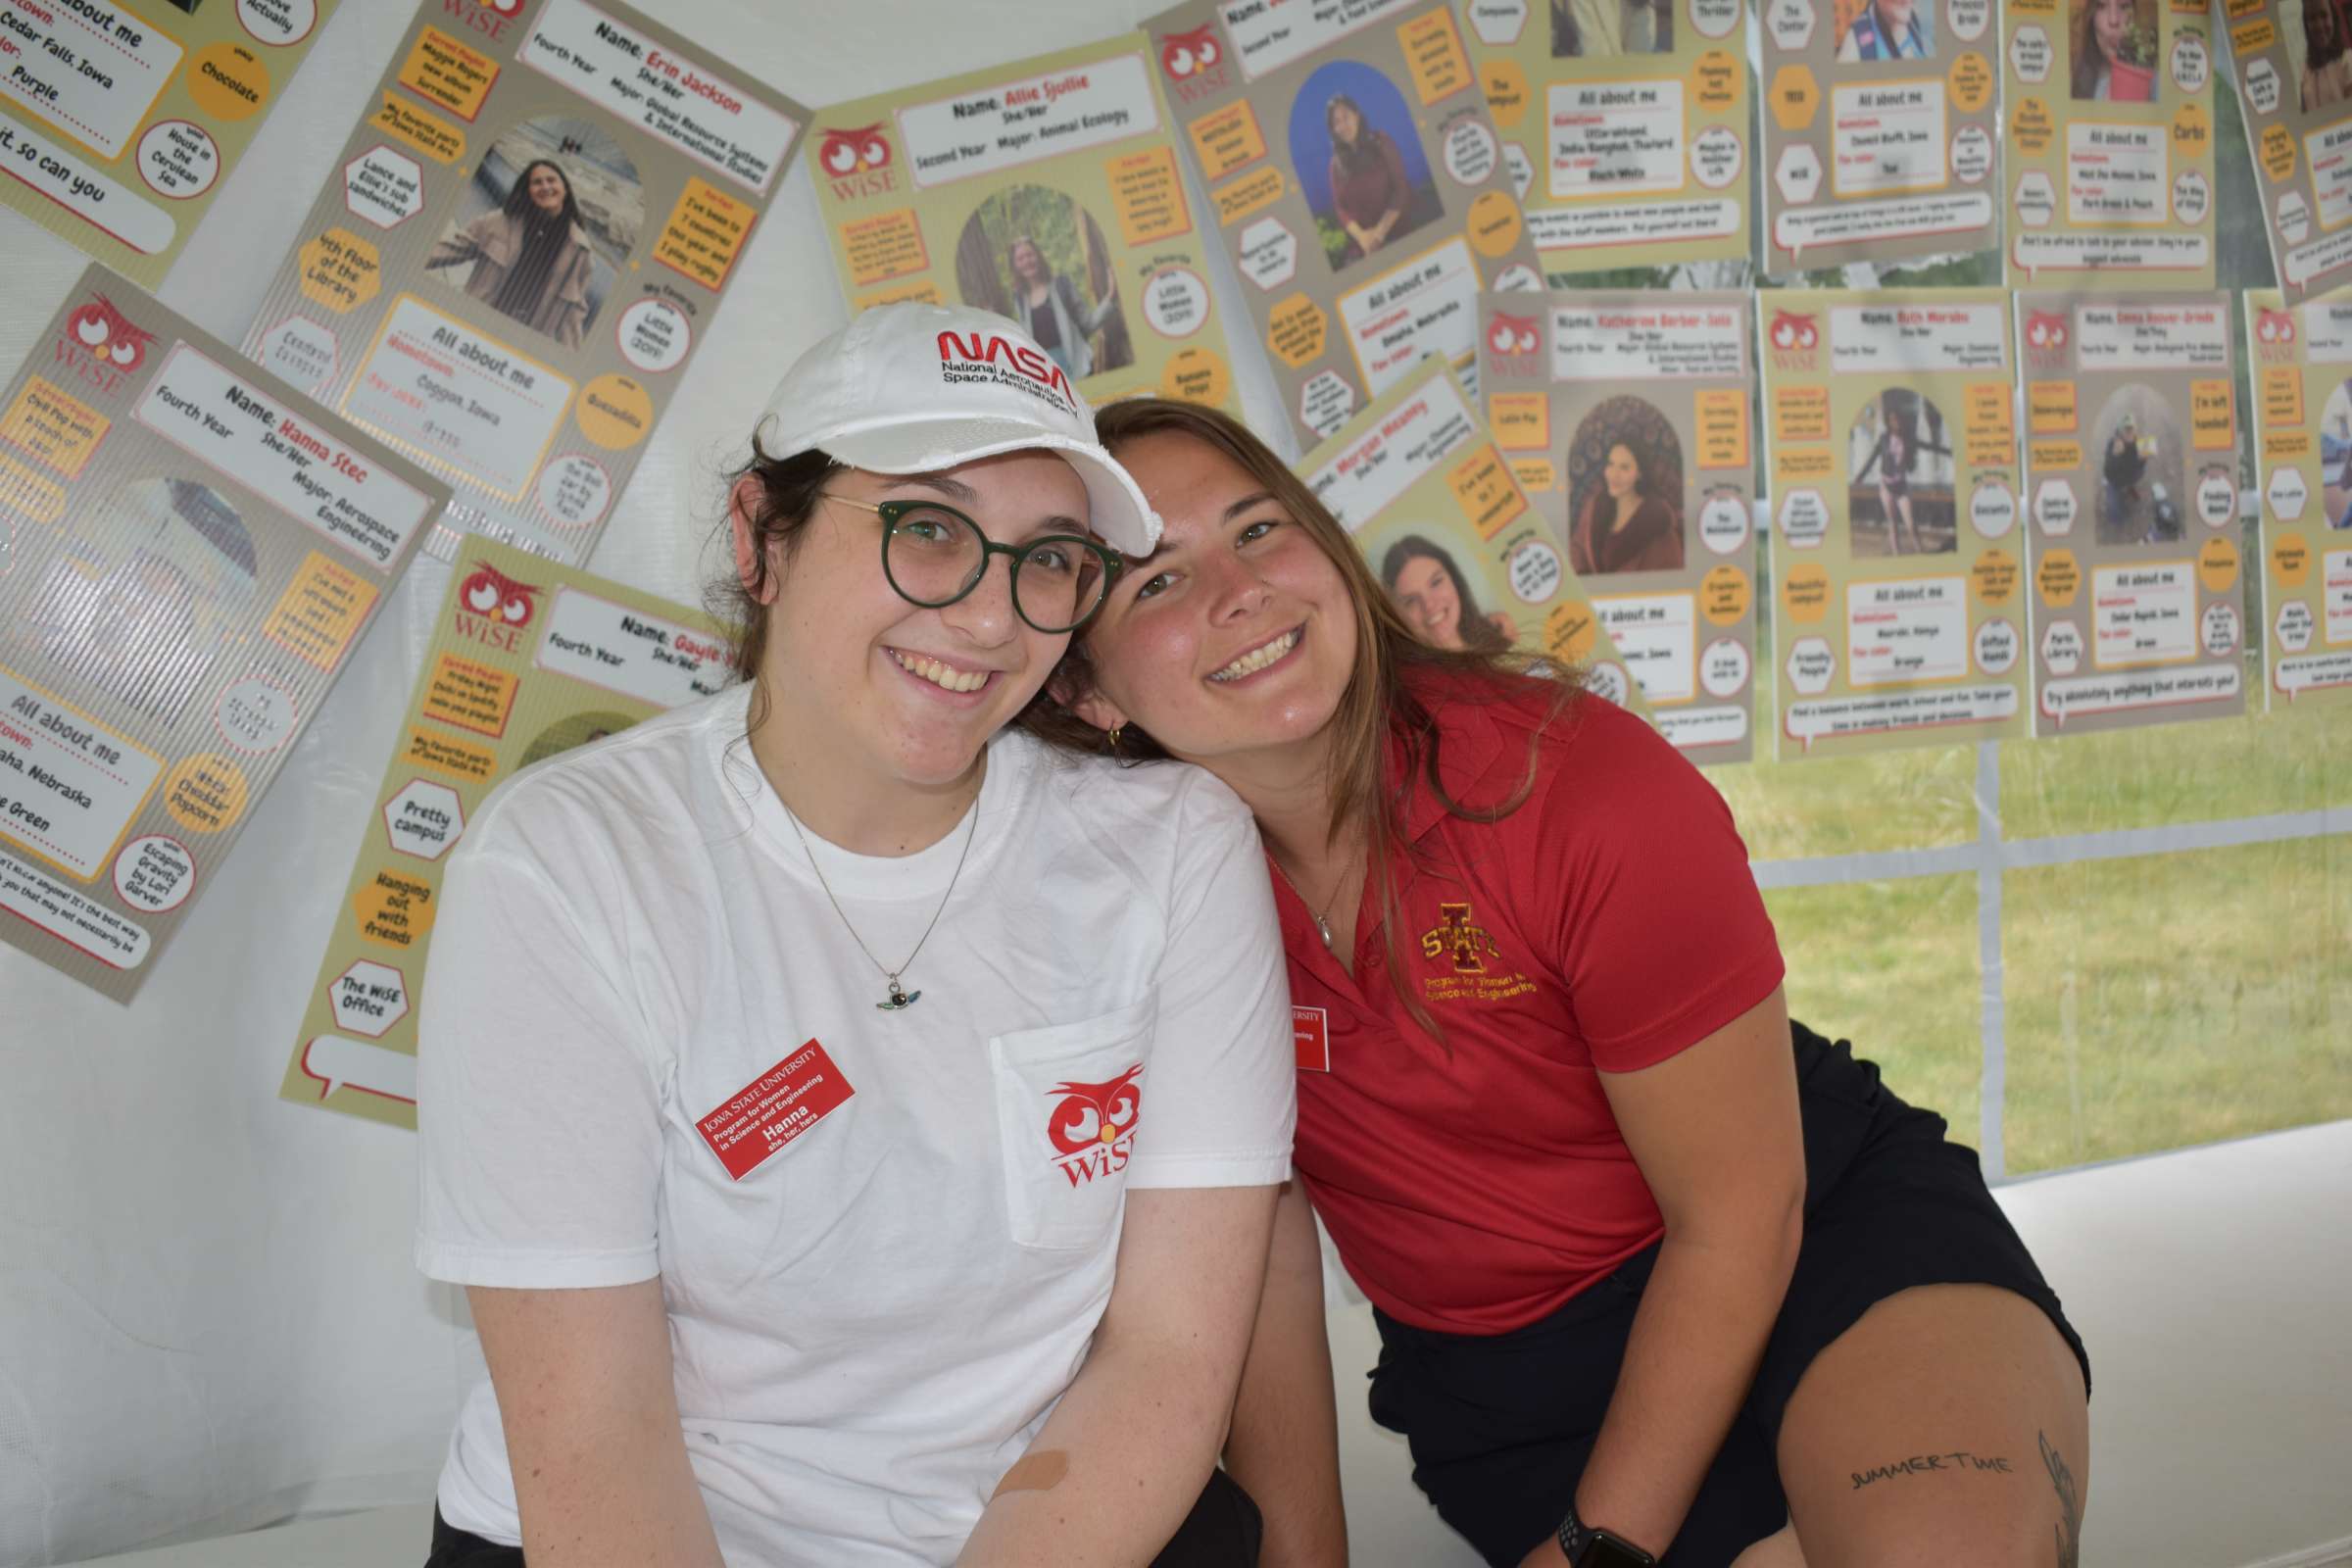 Two students smiling in the Community Groups tent at the WiSE Welcome